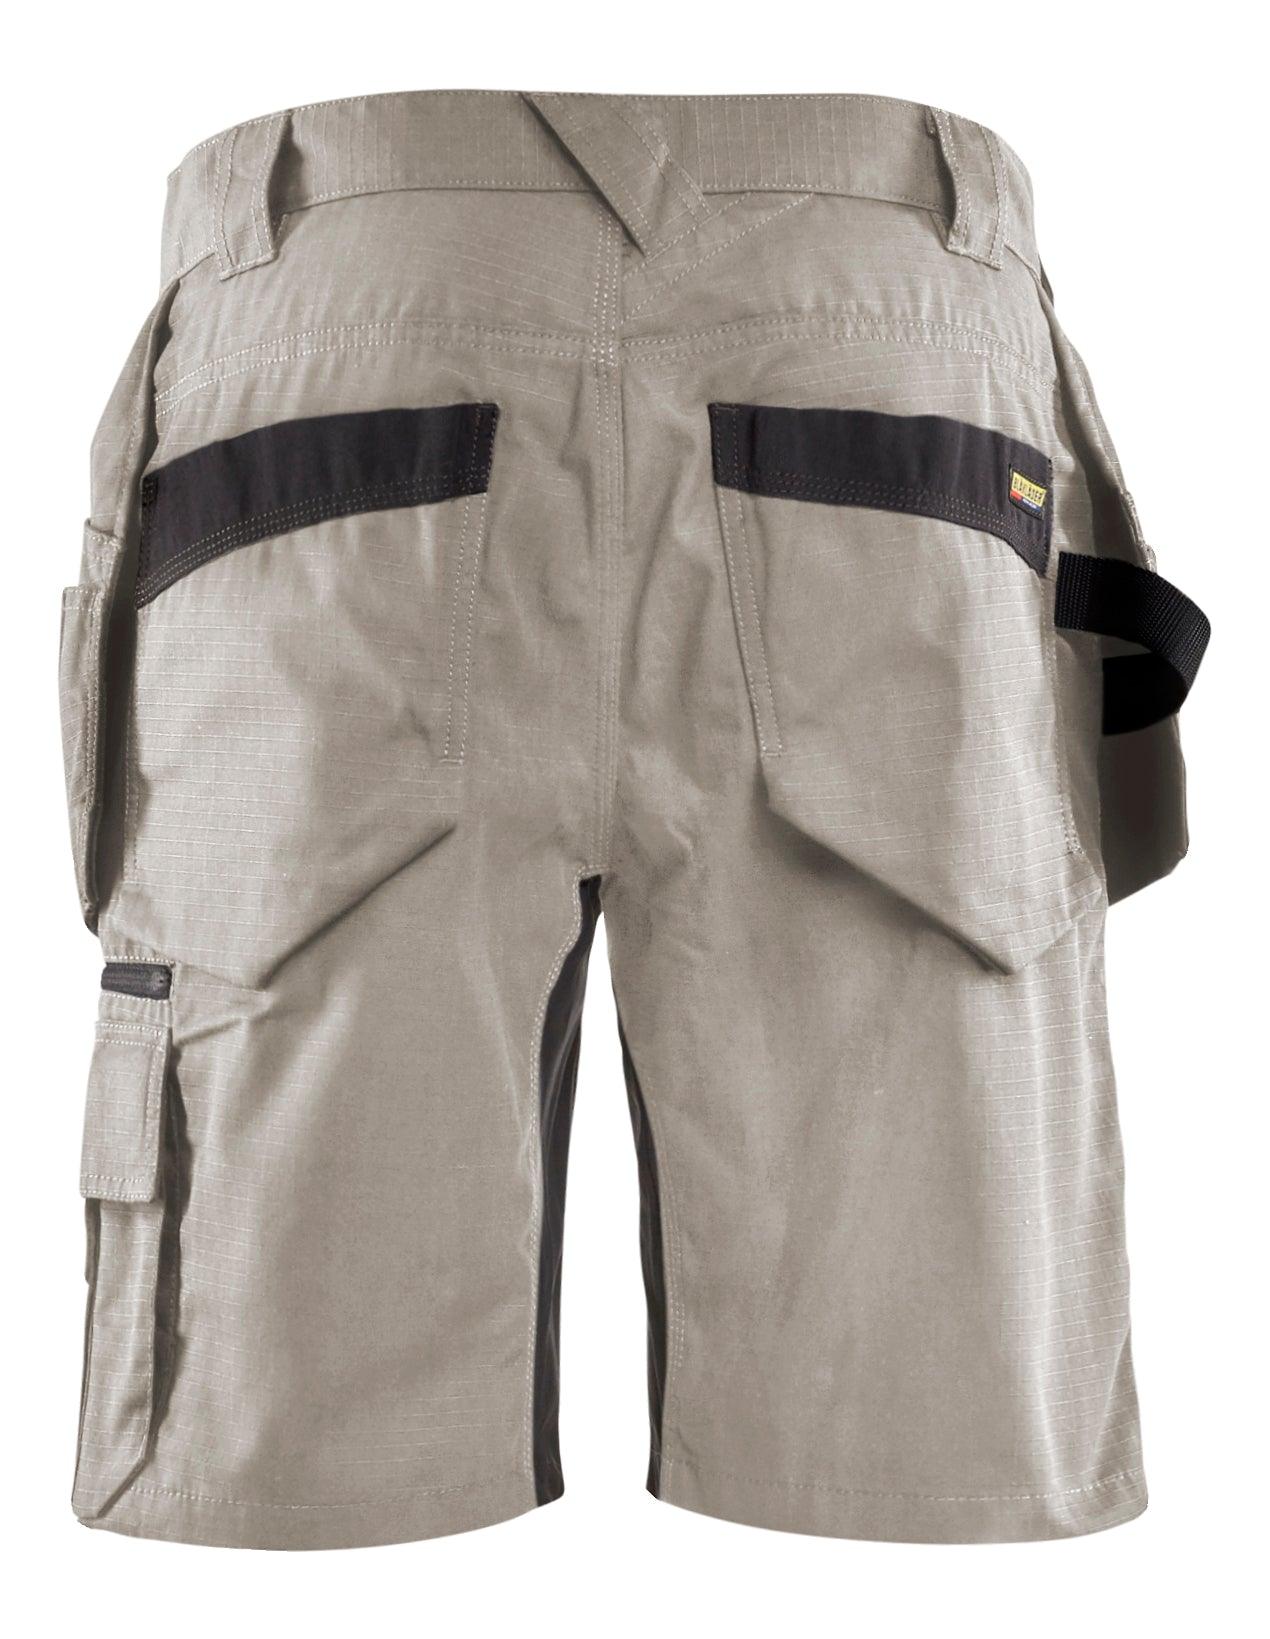 Blaklader 1637 7oz Rip Stop Shorts with Utility Pockets - Stone - Trusted Gear Company LLC